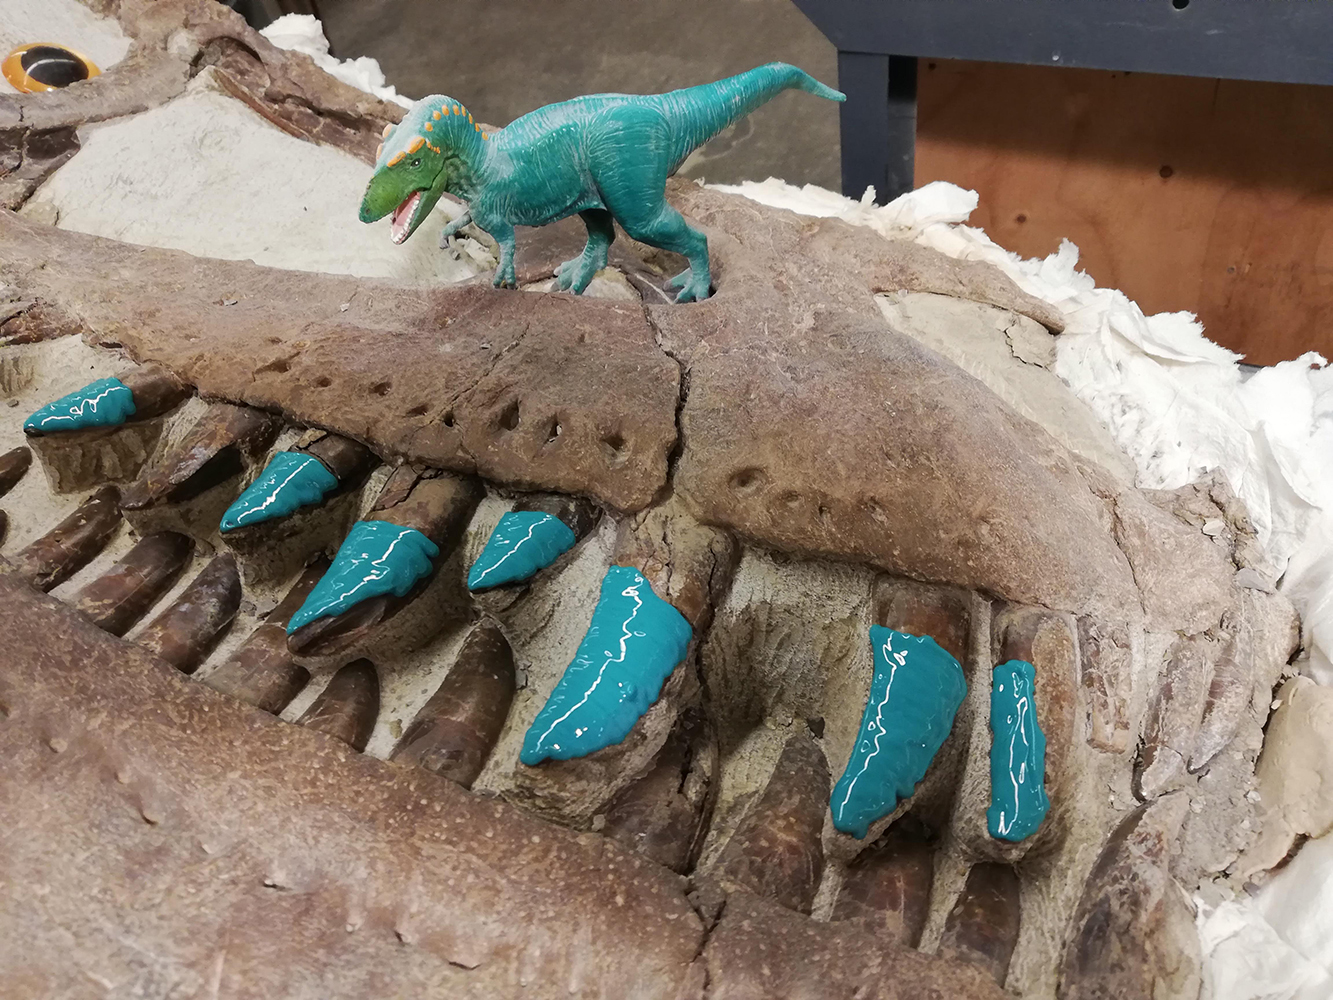 Theropod skull on its side, with blue silicon drying on the teeth and a toy blue dinosaur standing on top.